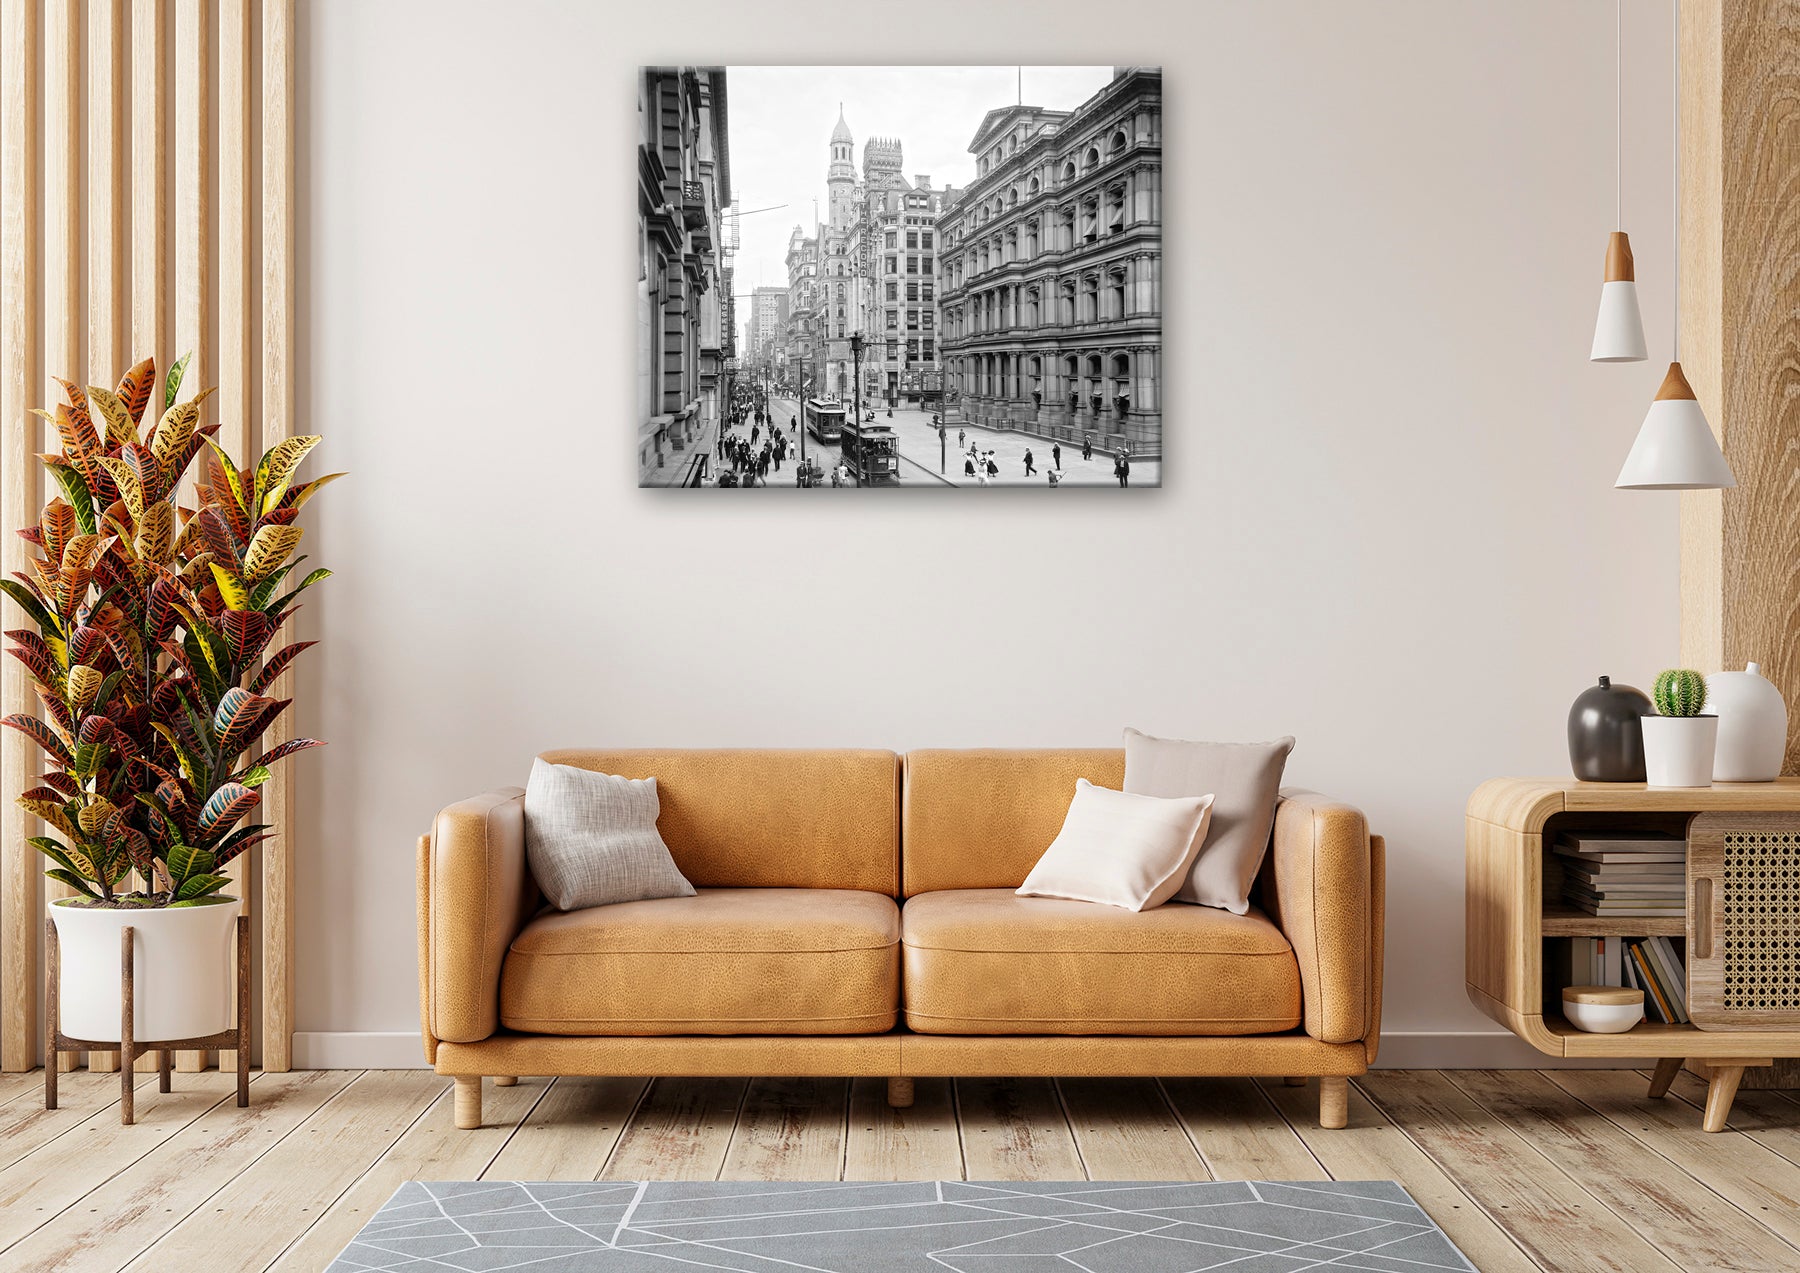 A canvas print of a photograph of Chestnut Street hanging above a yellow living room couch